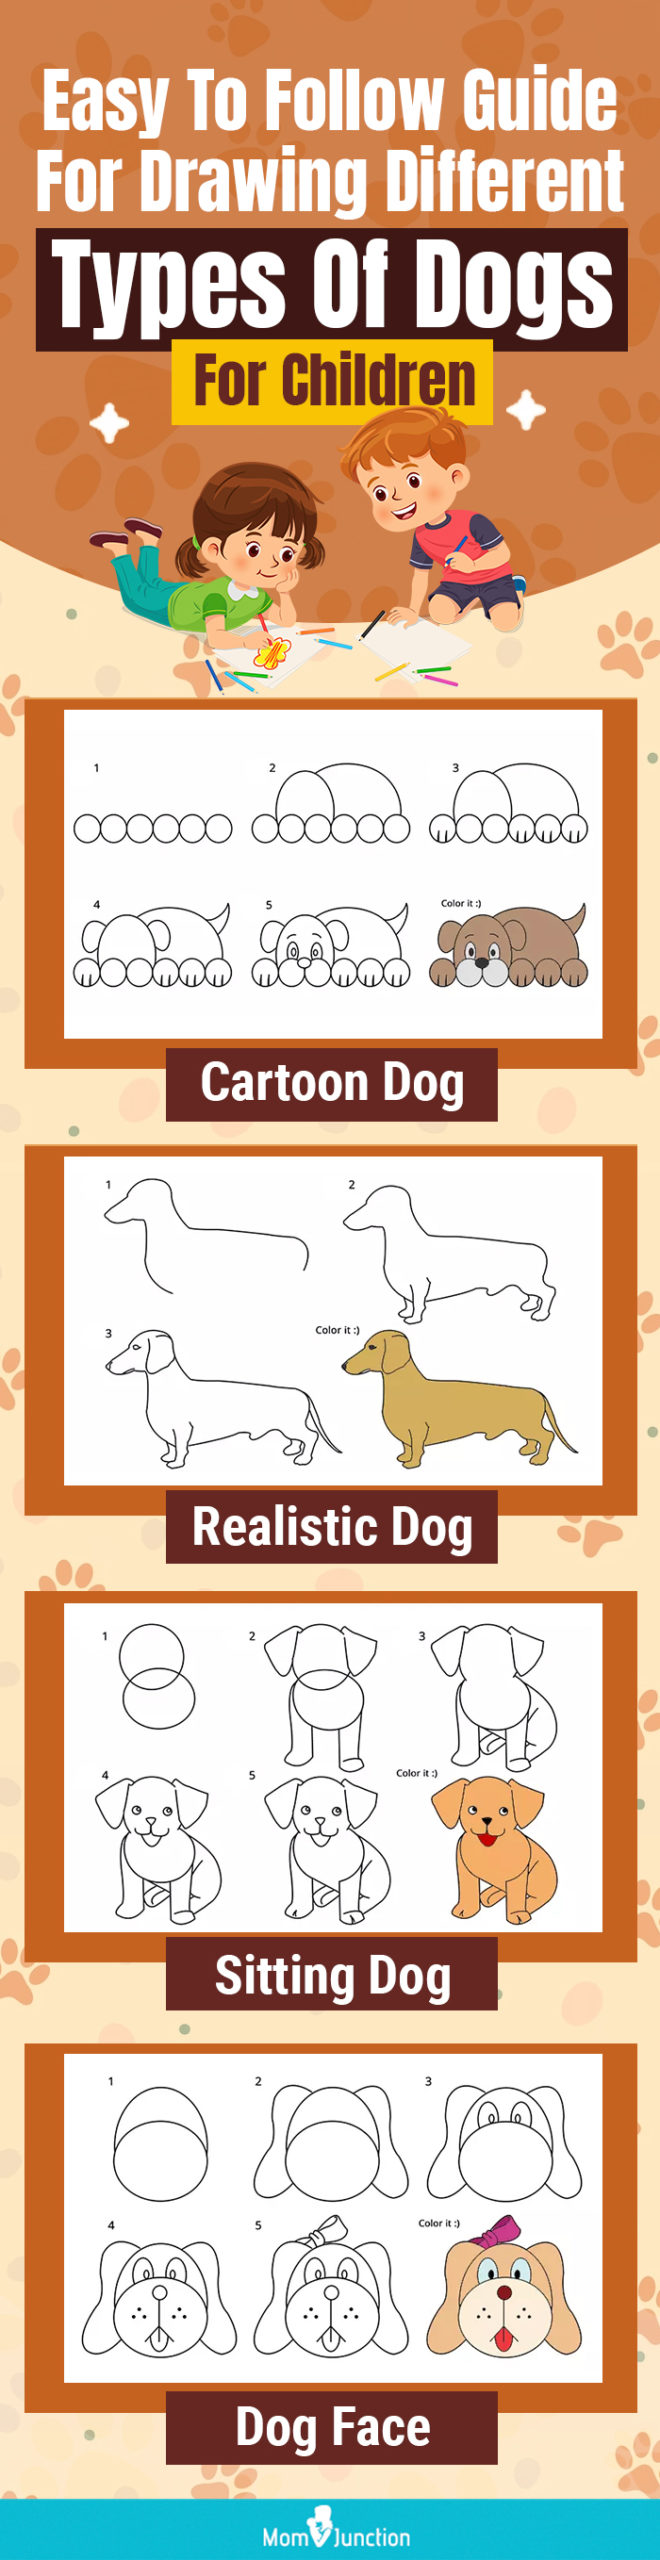 easy to follow guide for drawing different types of dogs for children (infographic)